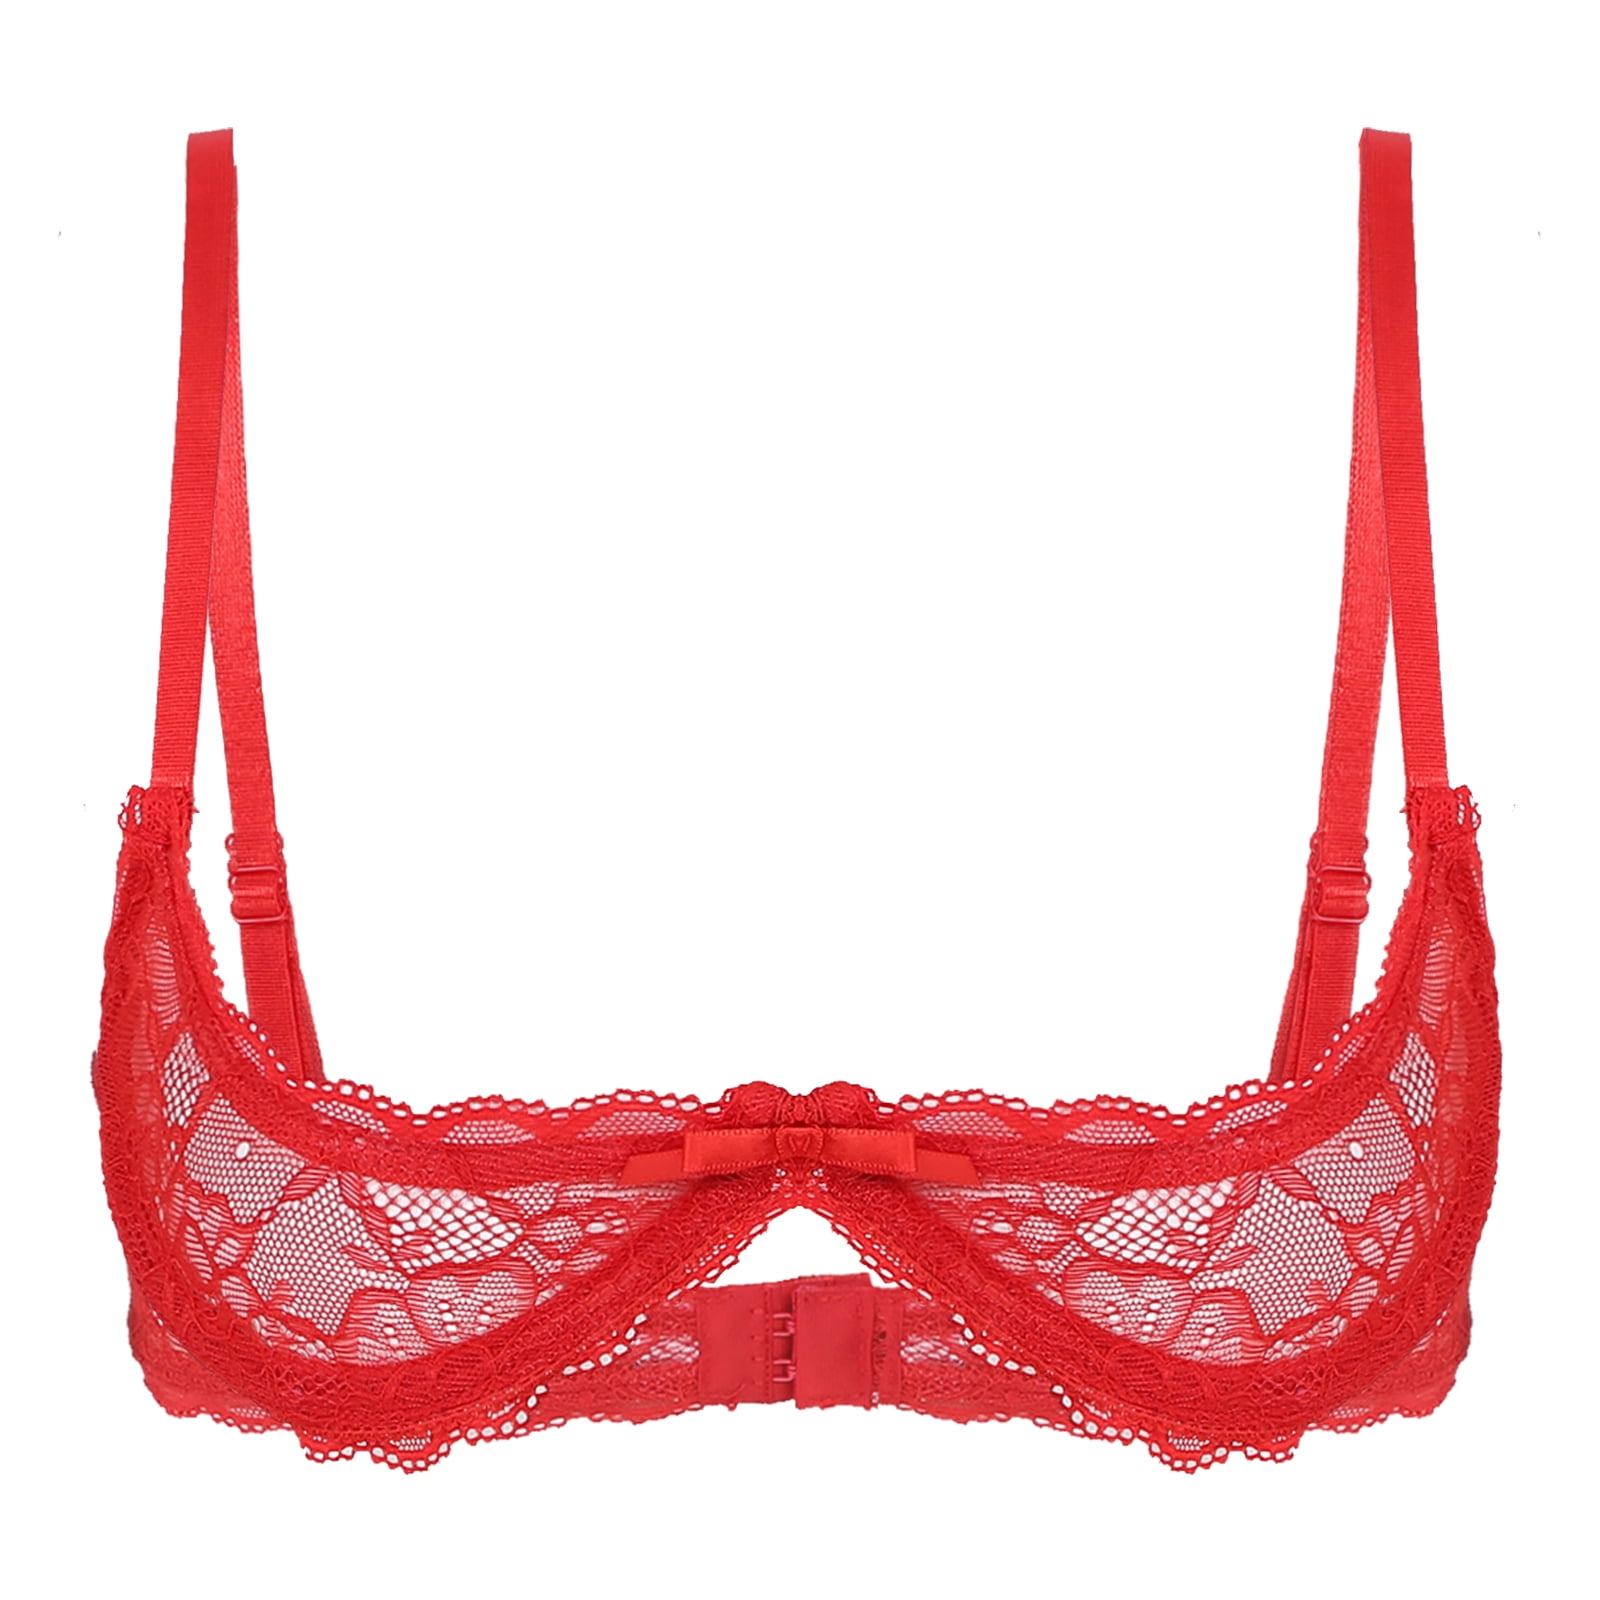 YONGHS Women Lace Sheer Push Up Bra 1/4 Quarter Cup Underwired Bralette  Lingerie A Red XL 